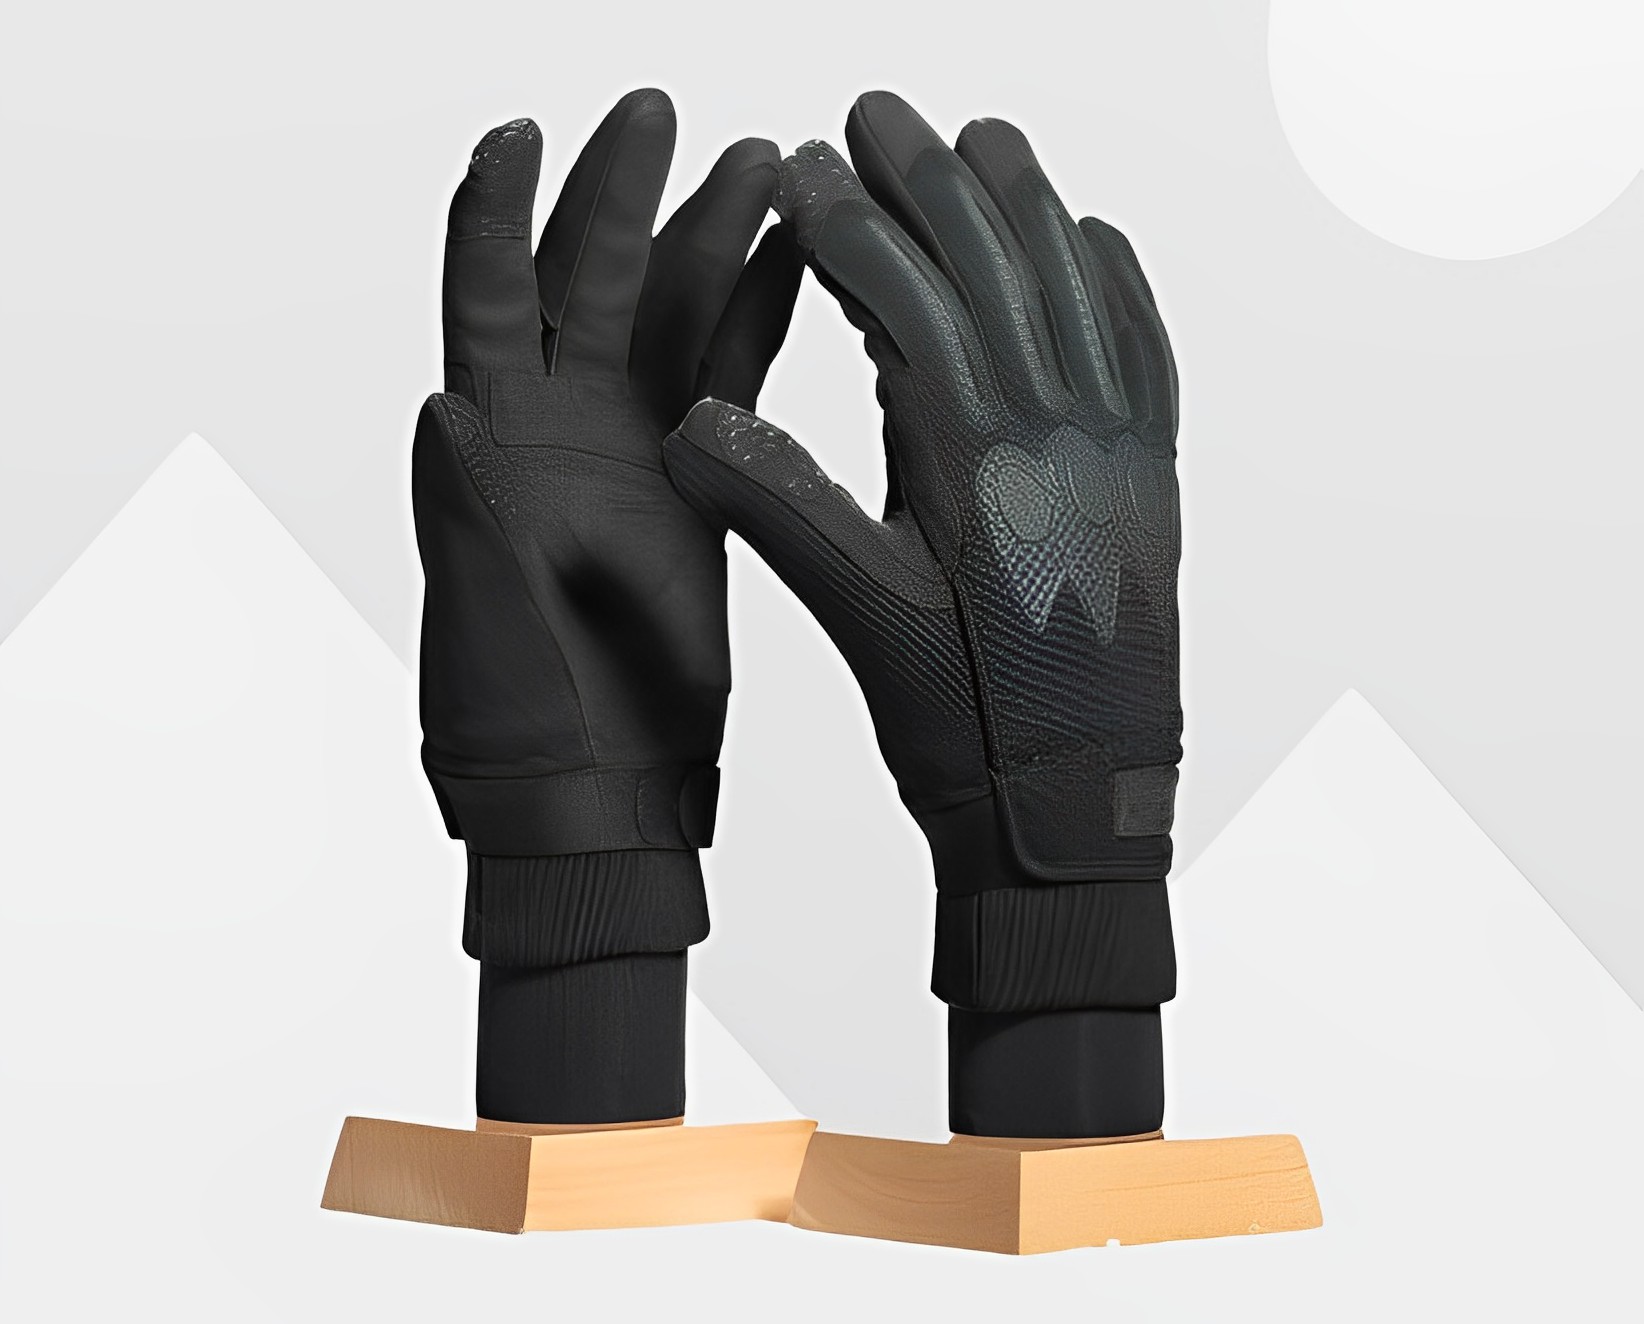 Image of the Model: PM108 Glove